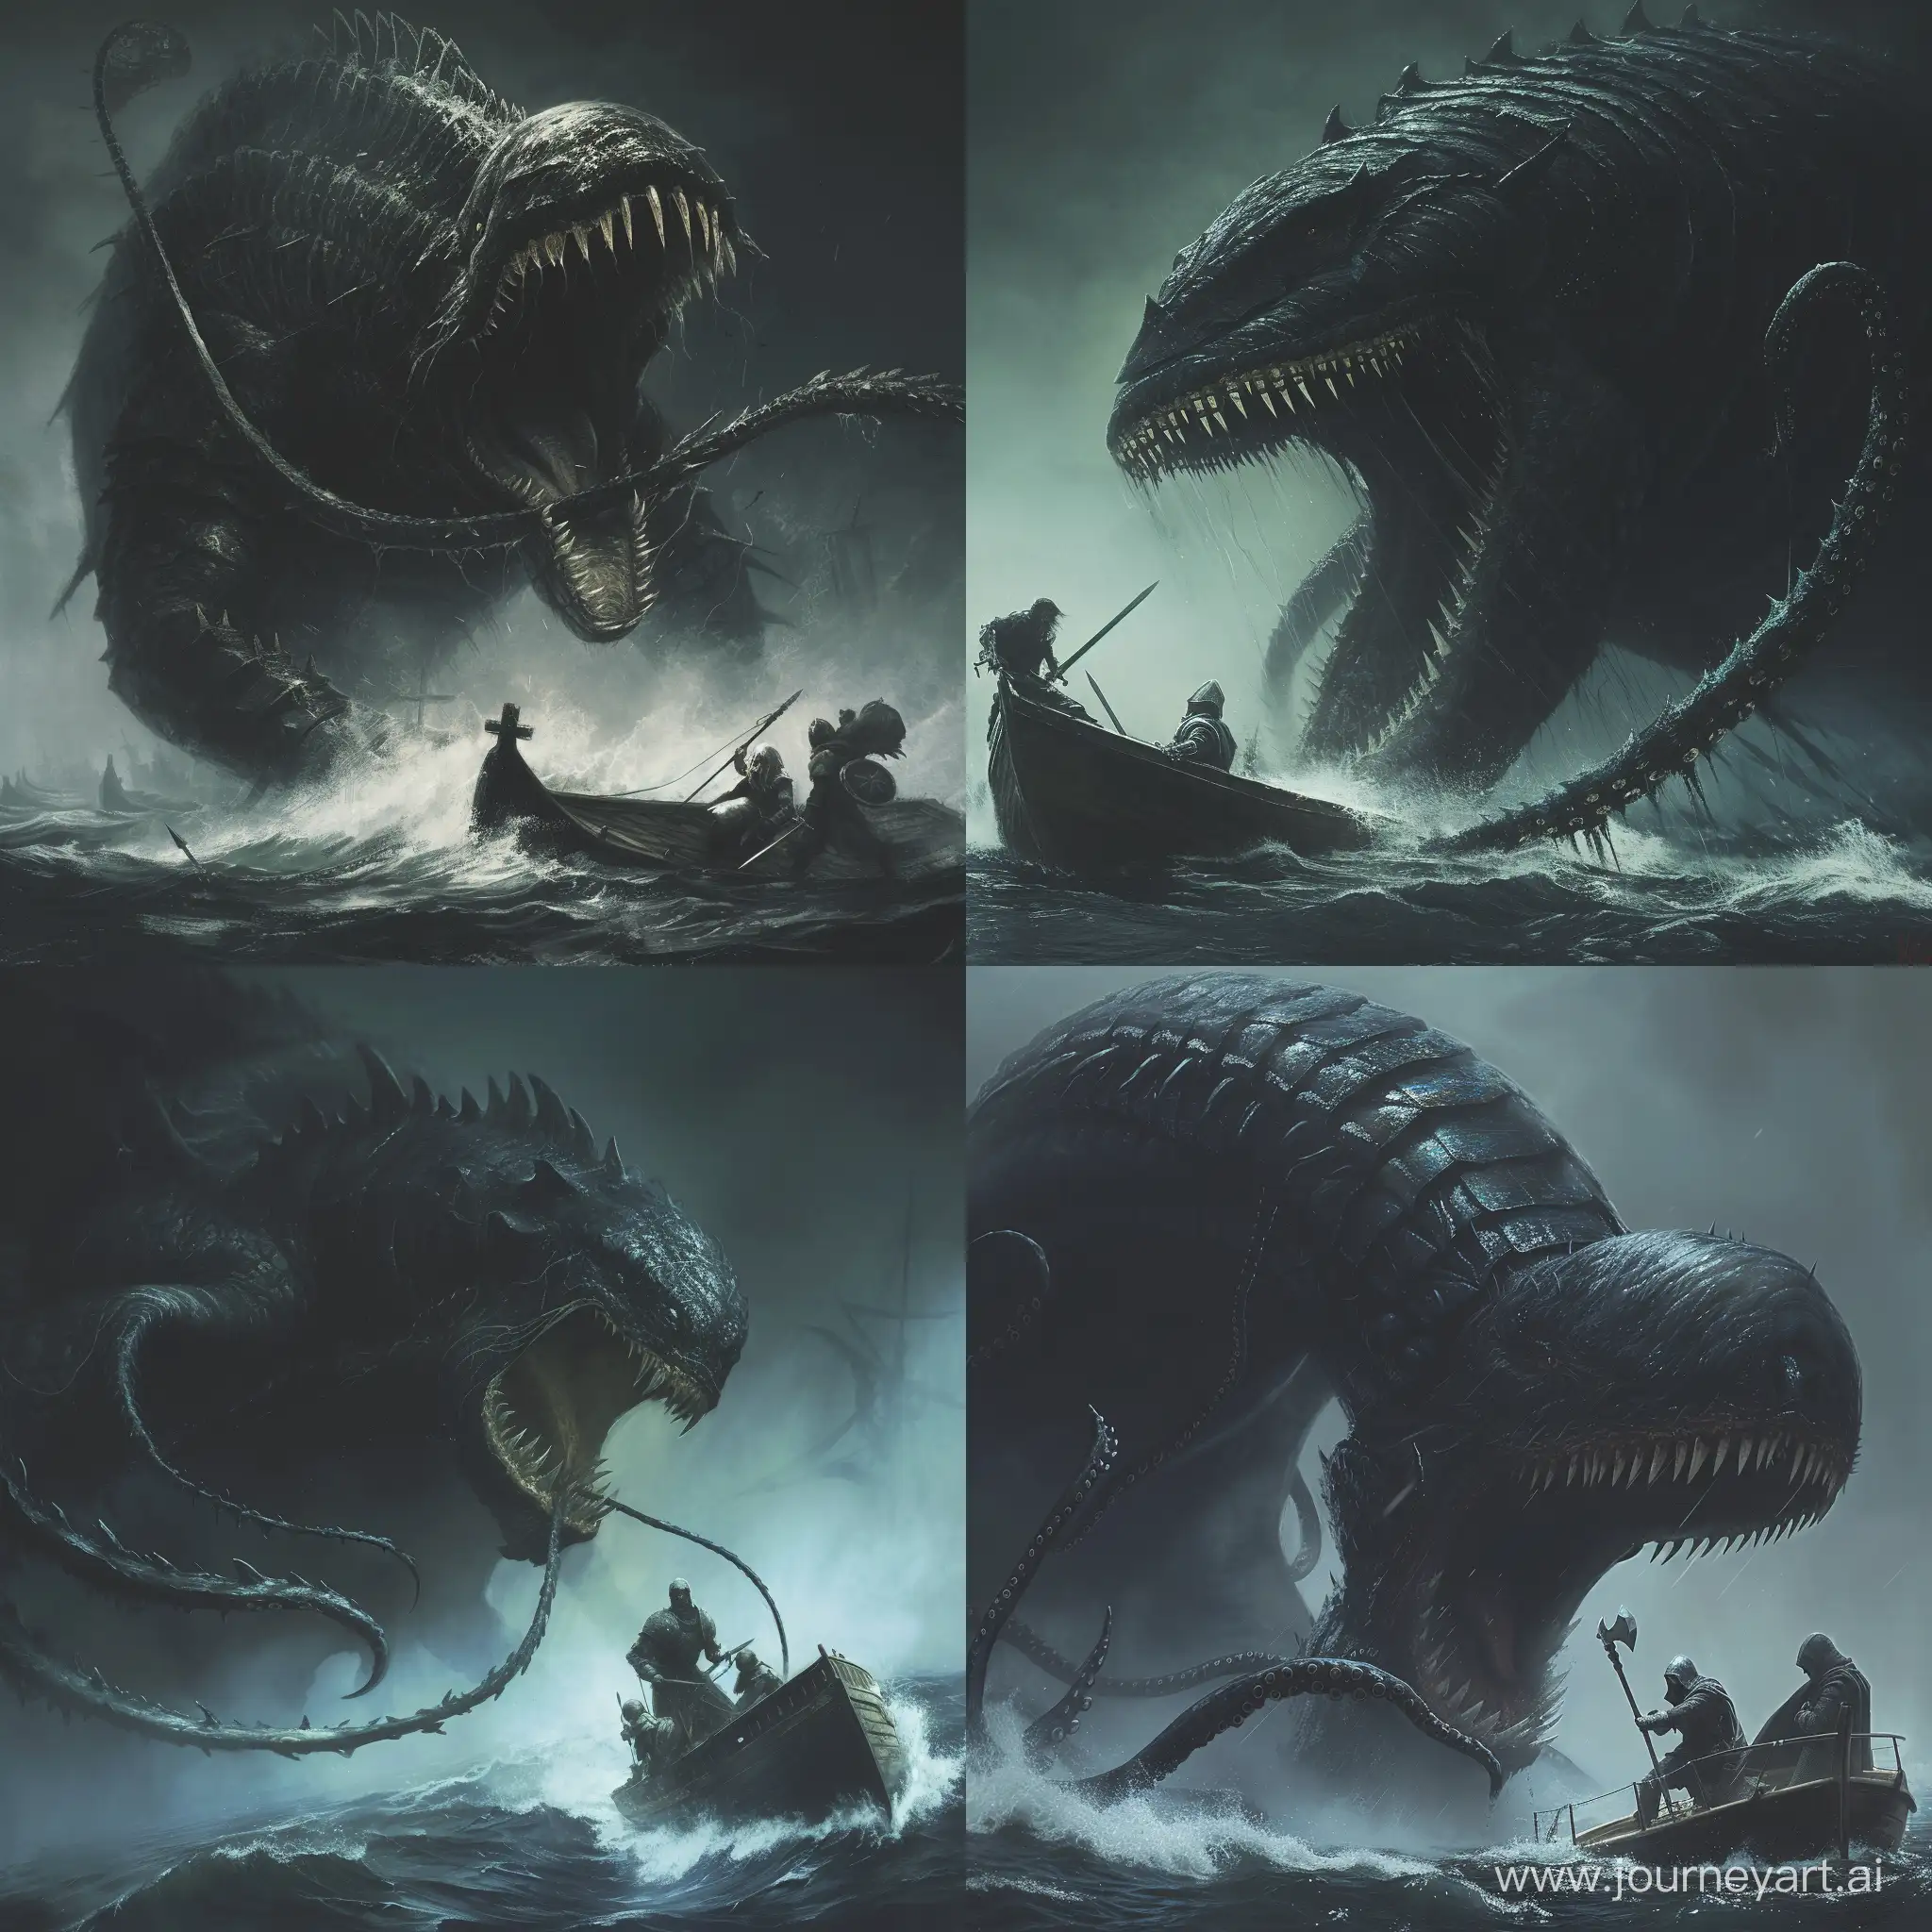 Dread-Leviathan-Emerges-Monstrous-Colossus-of-the-Abyss